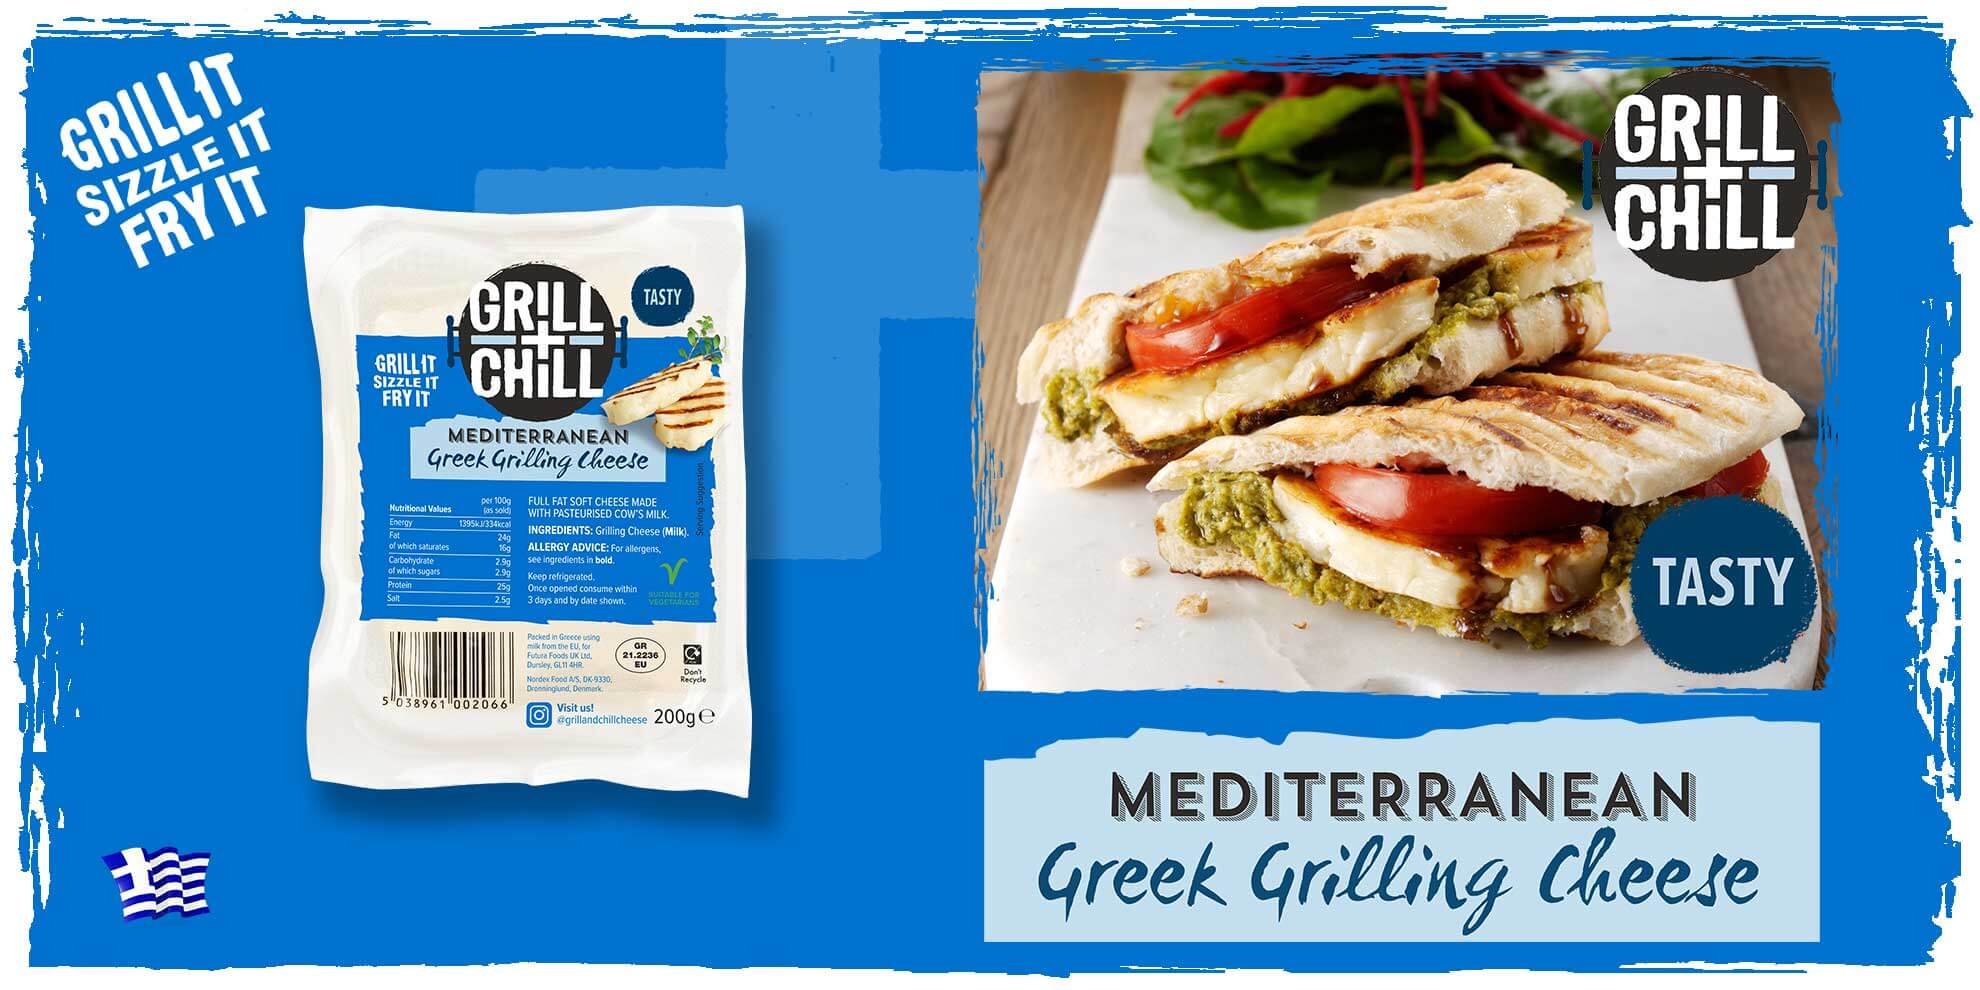 Grill + Chill Mediterranean Greek Grilling Cheese